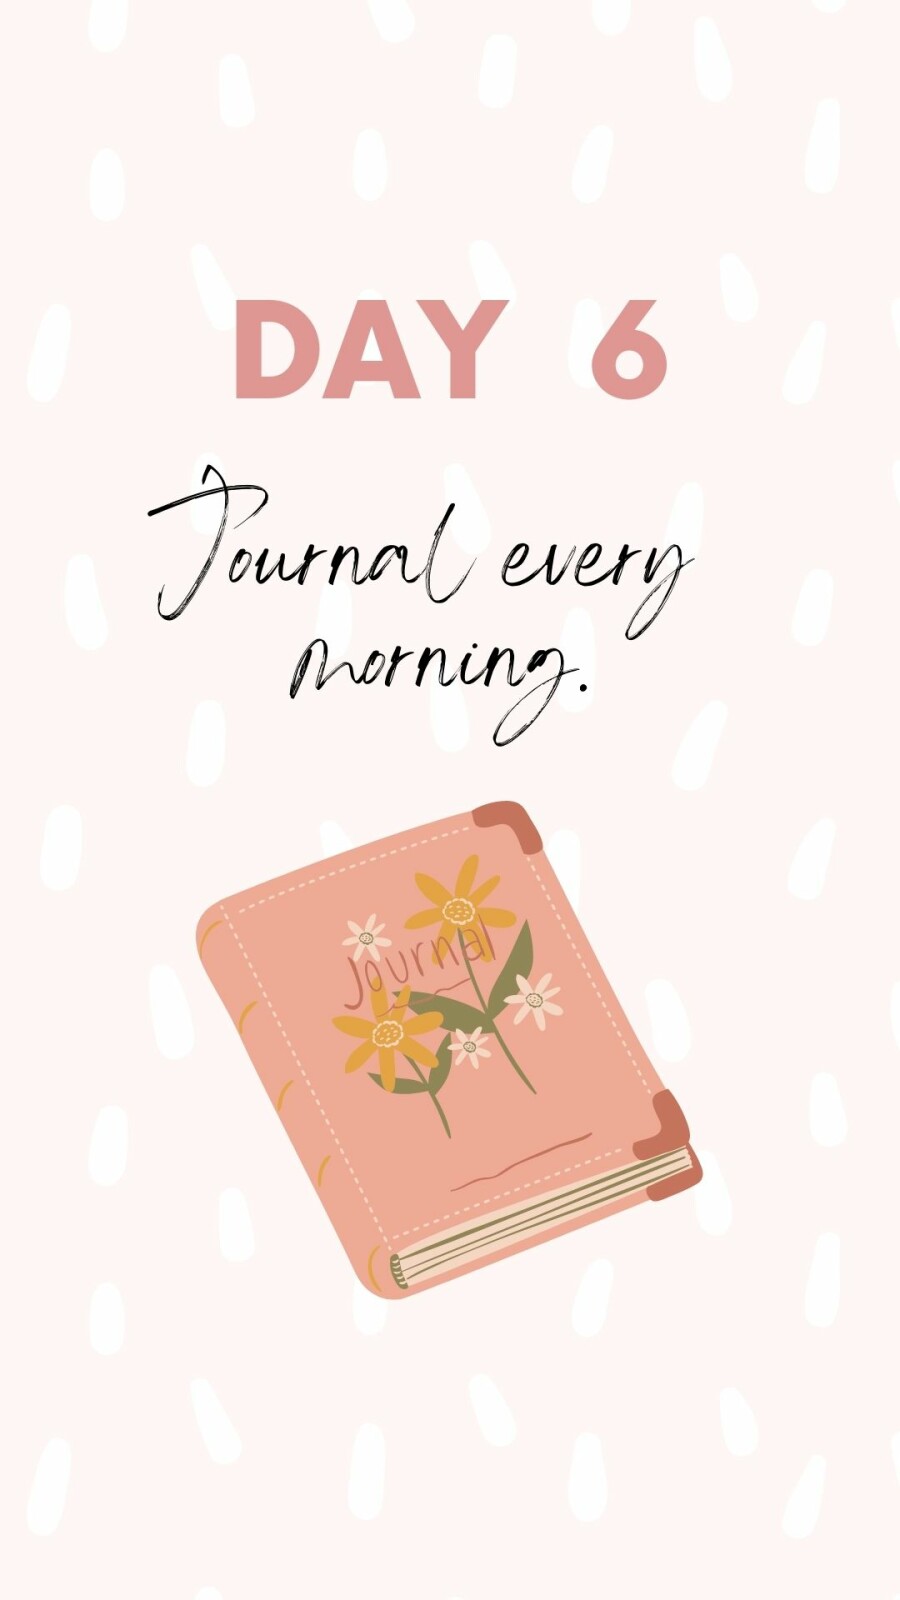 Self Love 101 Journal every morning - Day 6